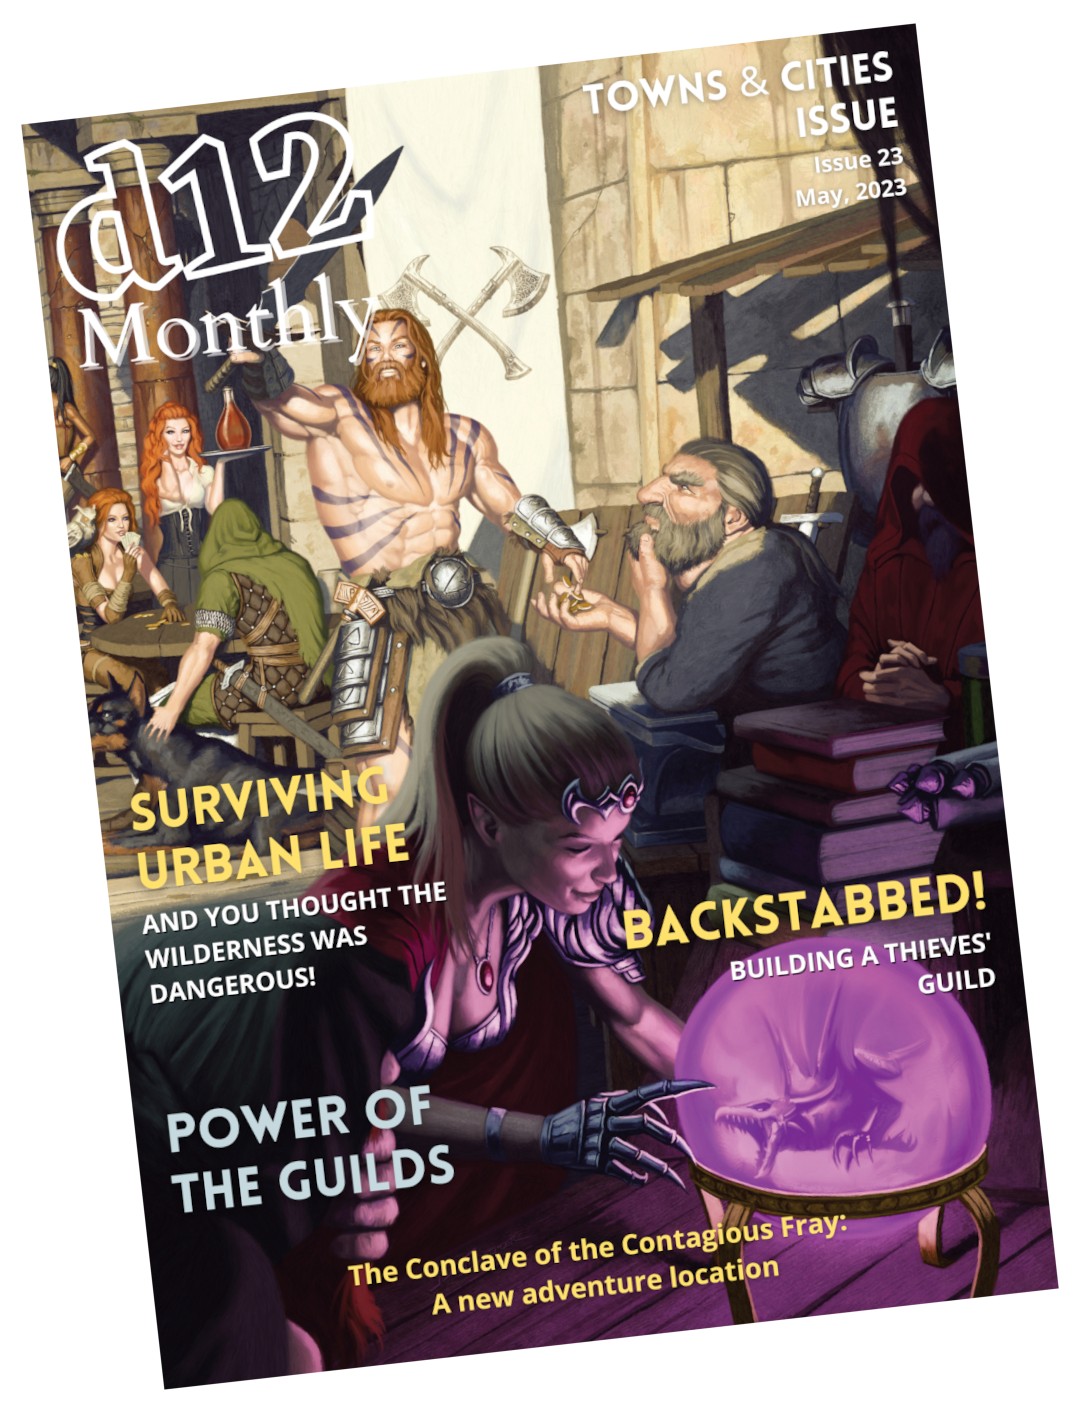 Yumdm Issue 23 Of My Dnd Zine D12monthly Is Out Fr… Ttrpg Hangout Social